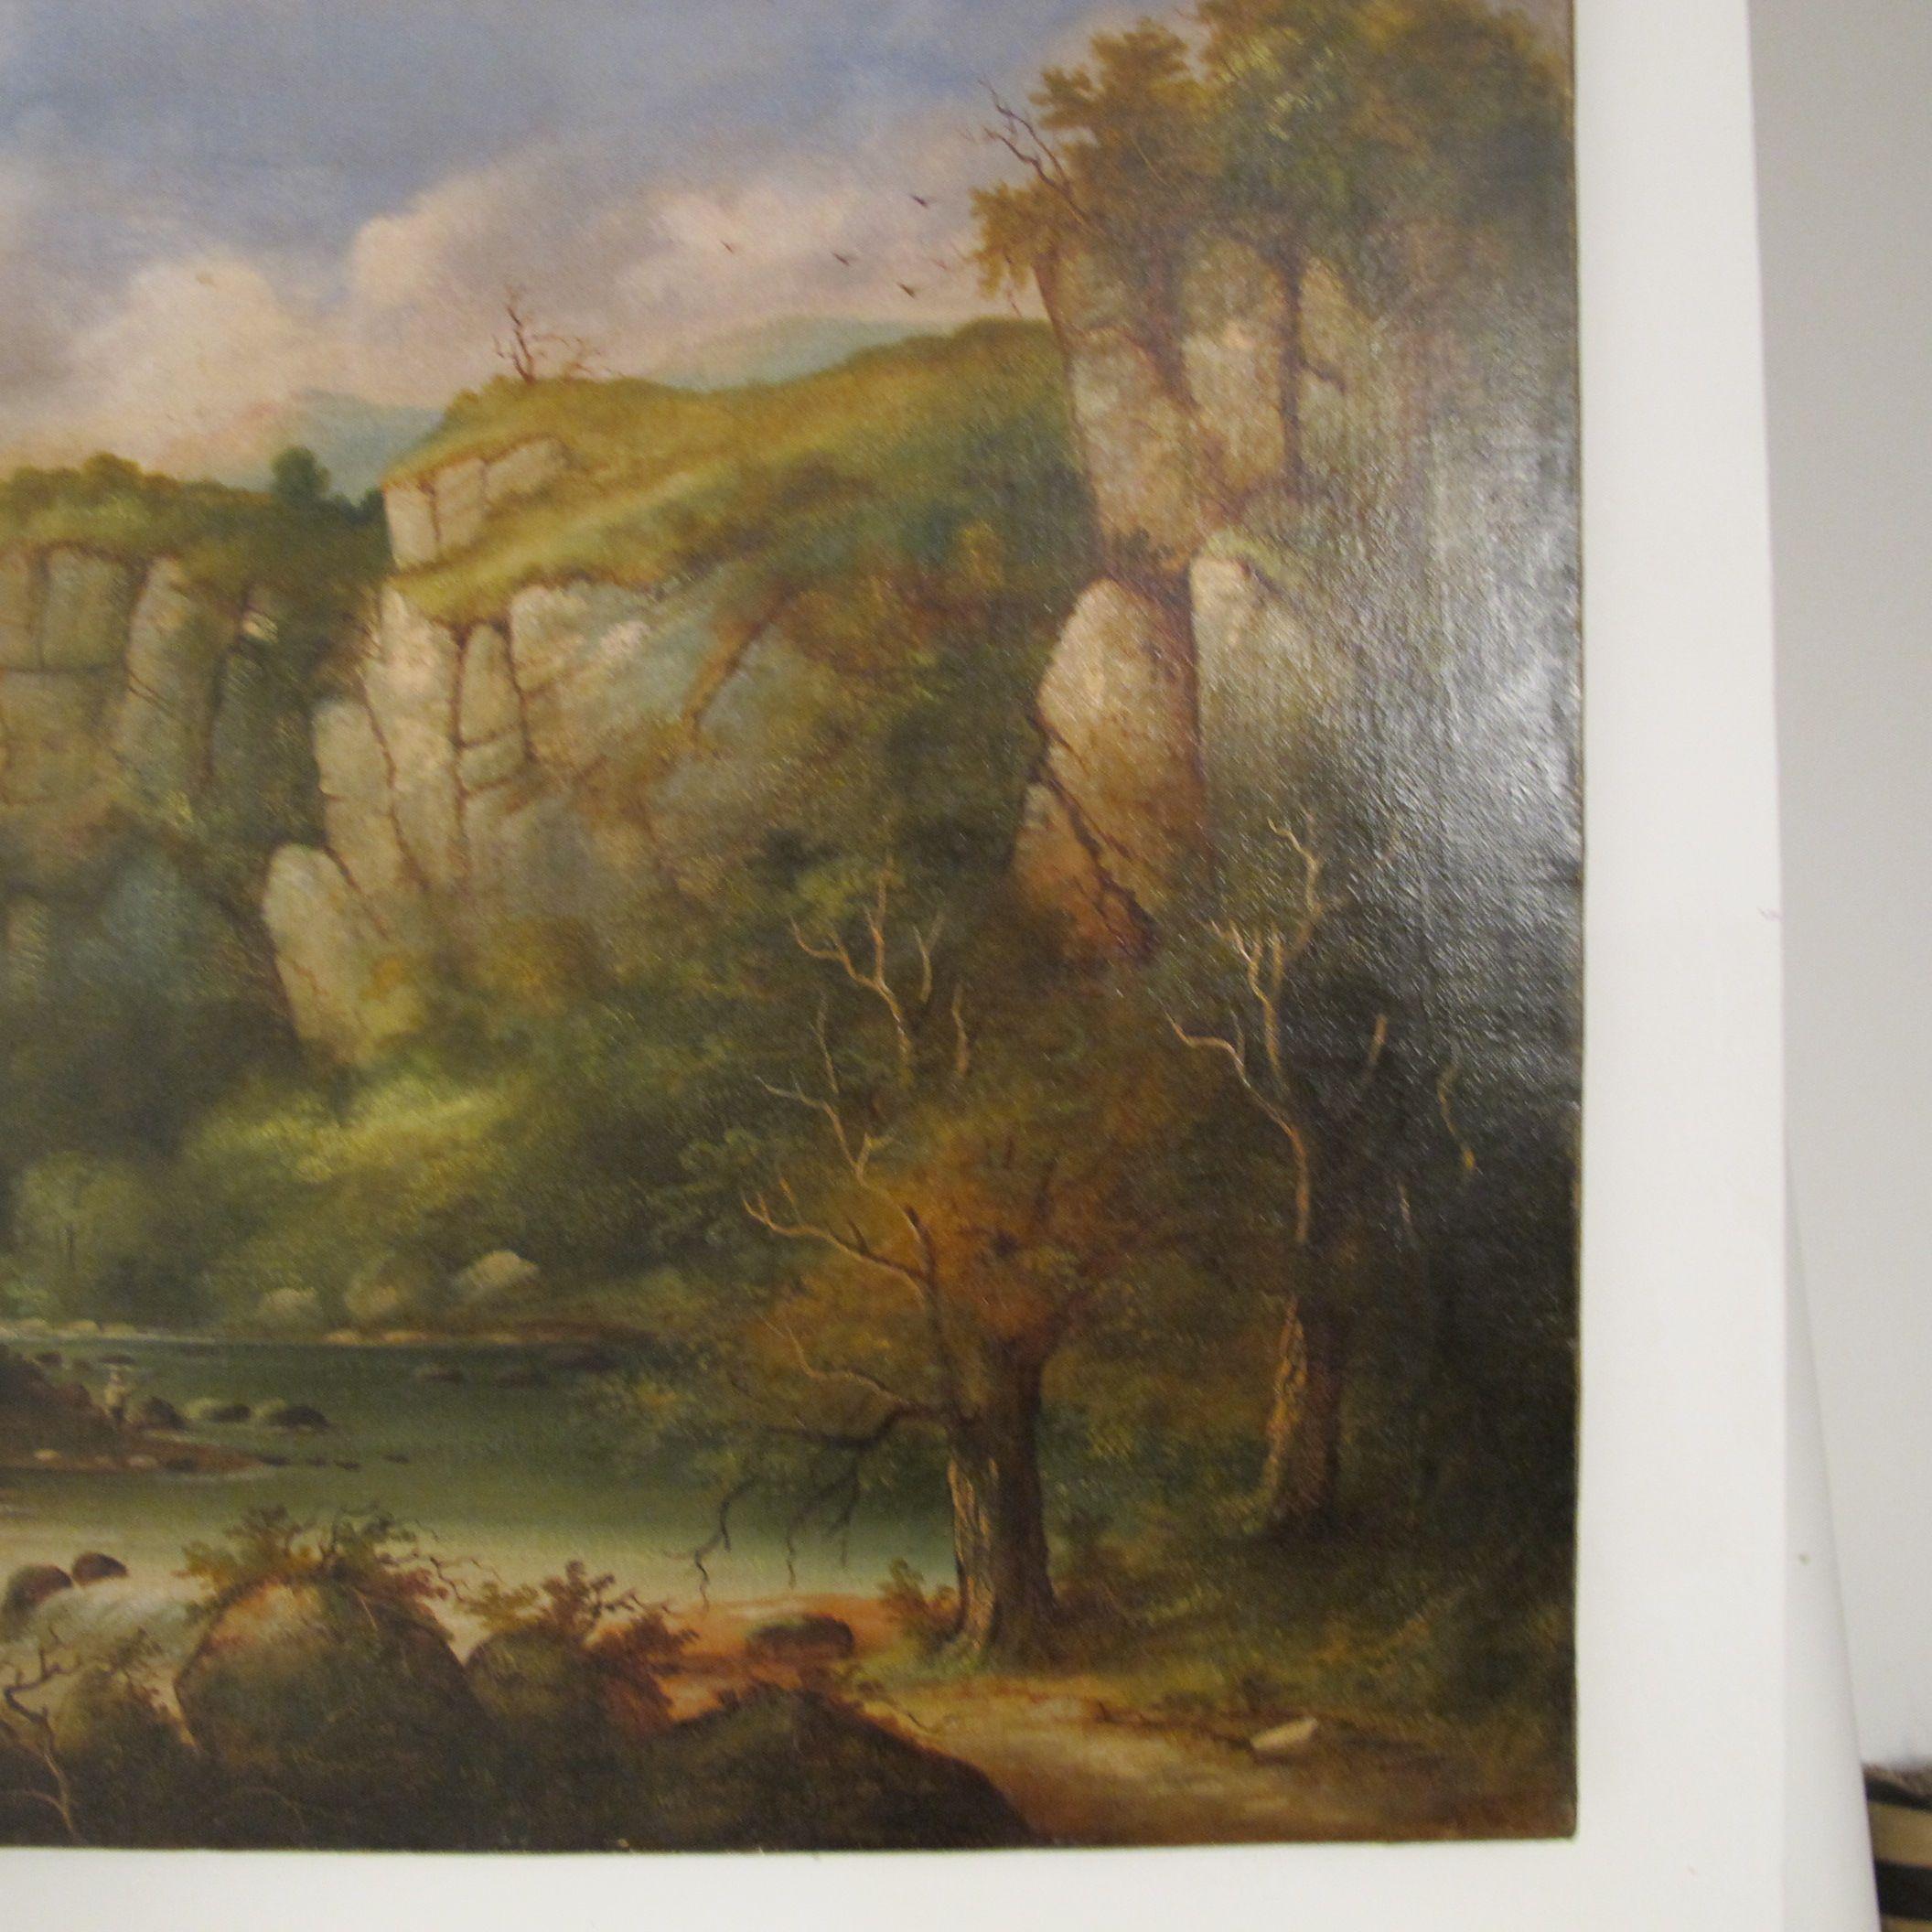 Hand-Painted Large European Landscape Painting, Early 19th Century